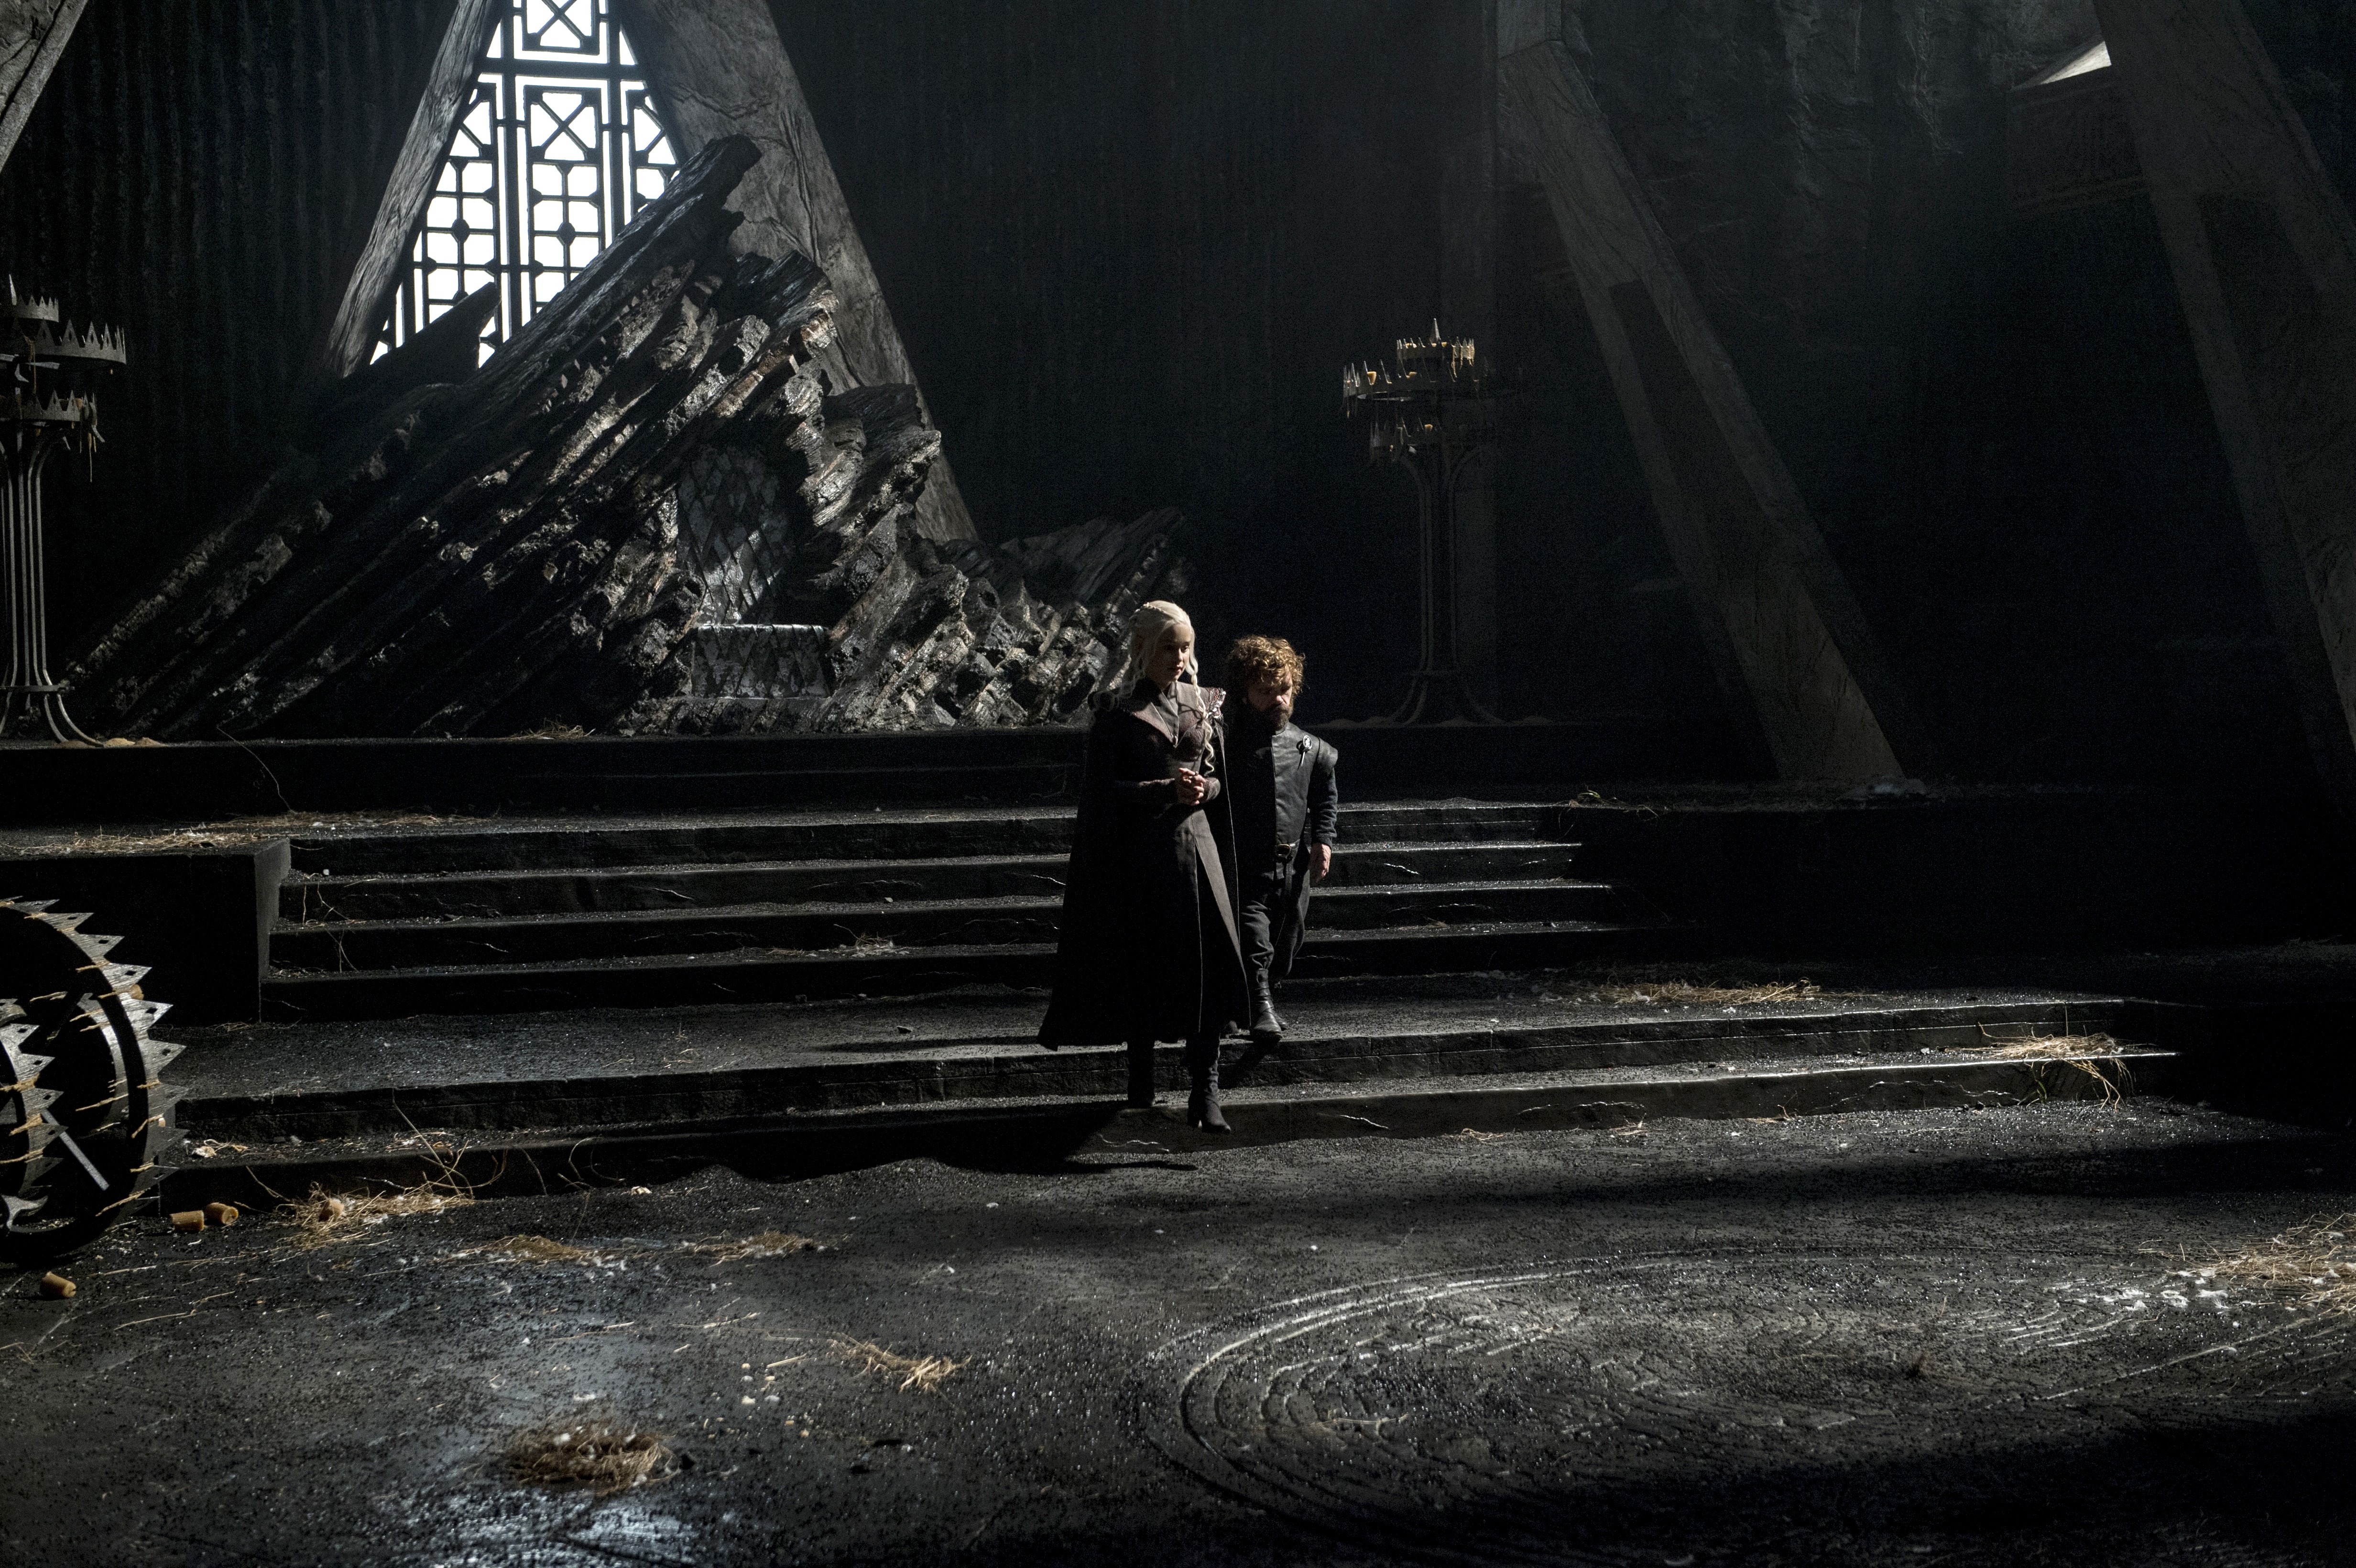 Tyrion And Daenerys - Game Of Thrones Dragonstone Inside - HD Wallpaper 